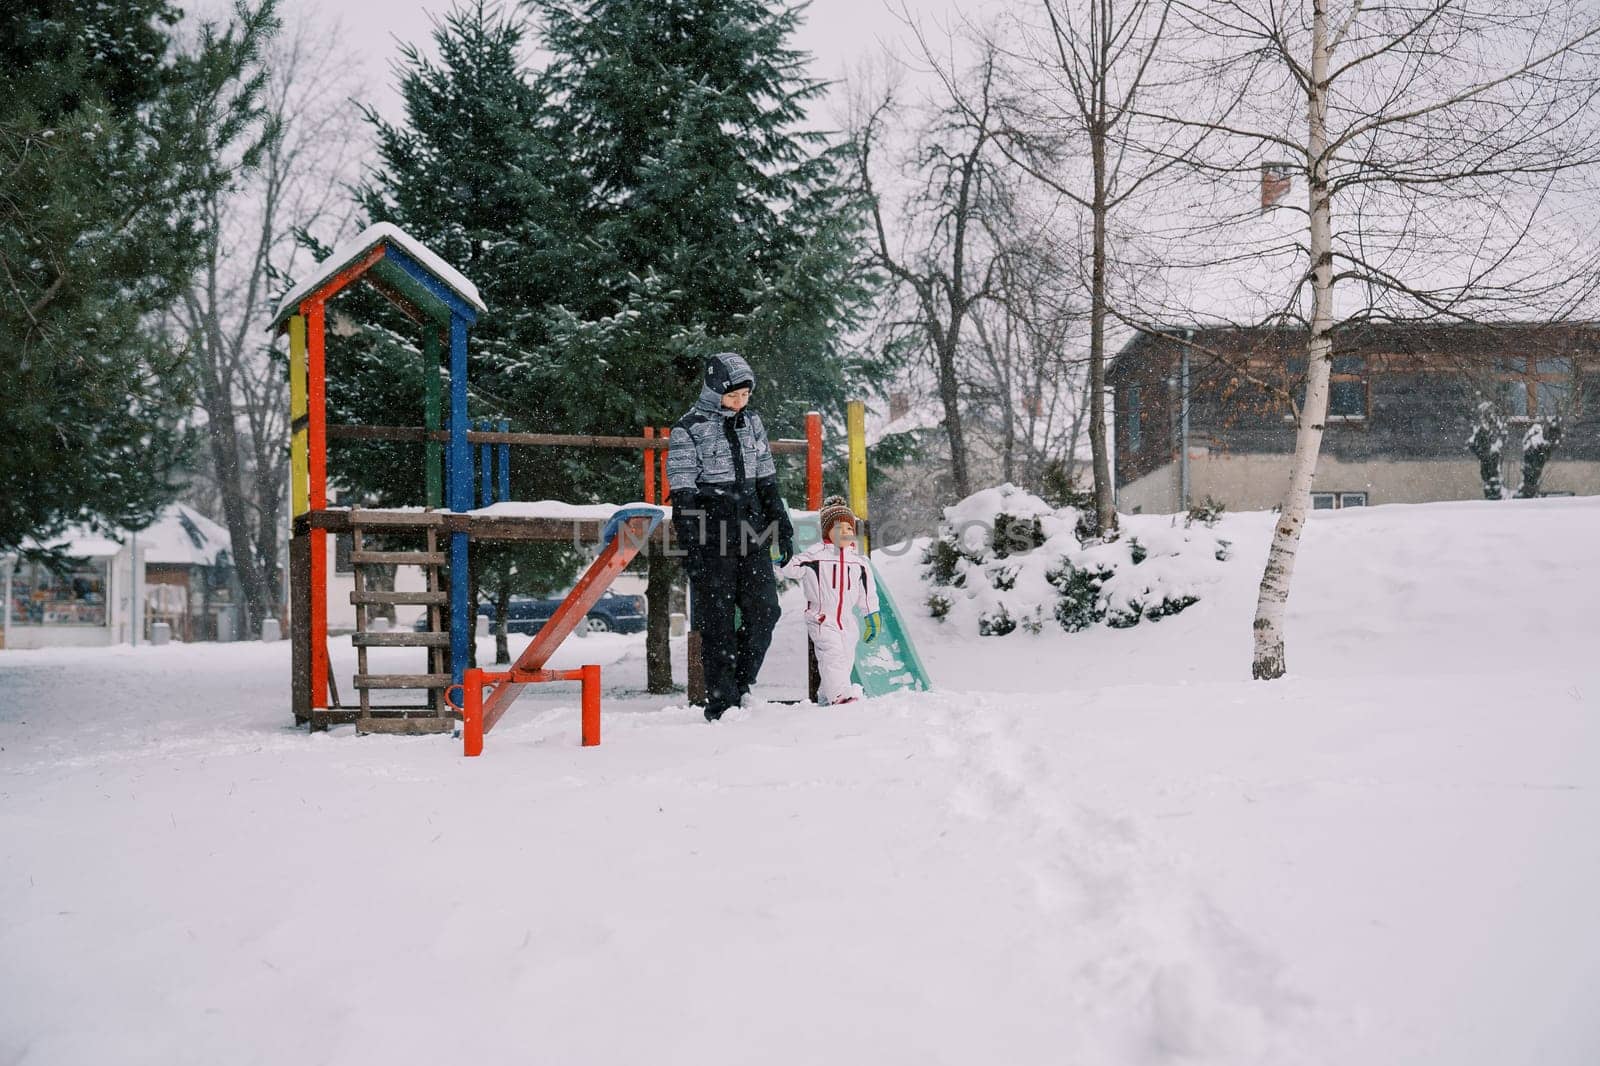 Little girl and her mother walk holding hands from a colorful snow-covered slide through the park under snowfall. High quality photo